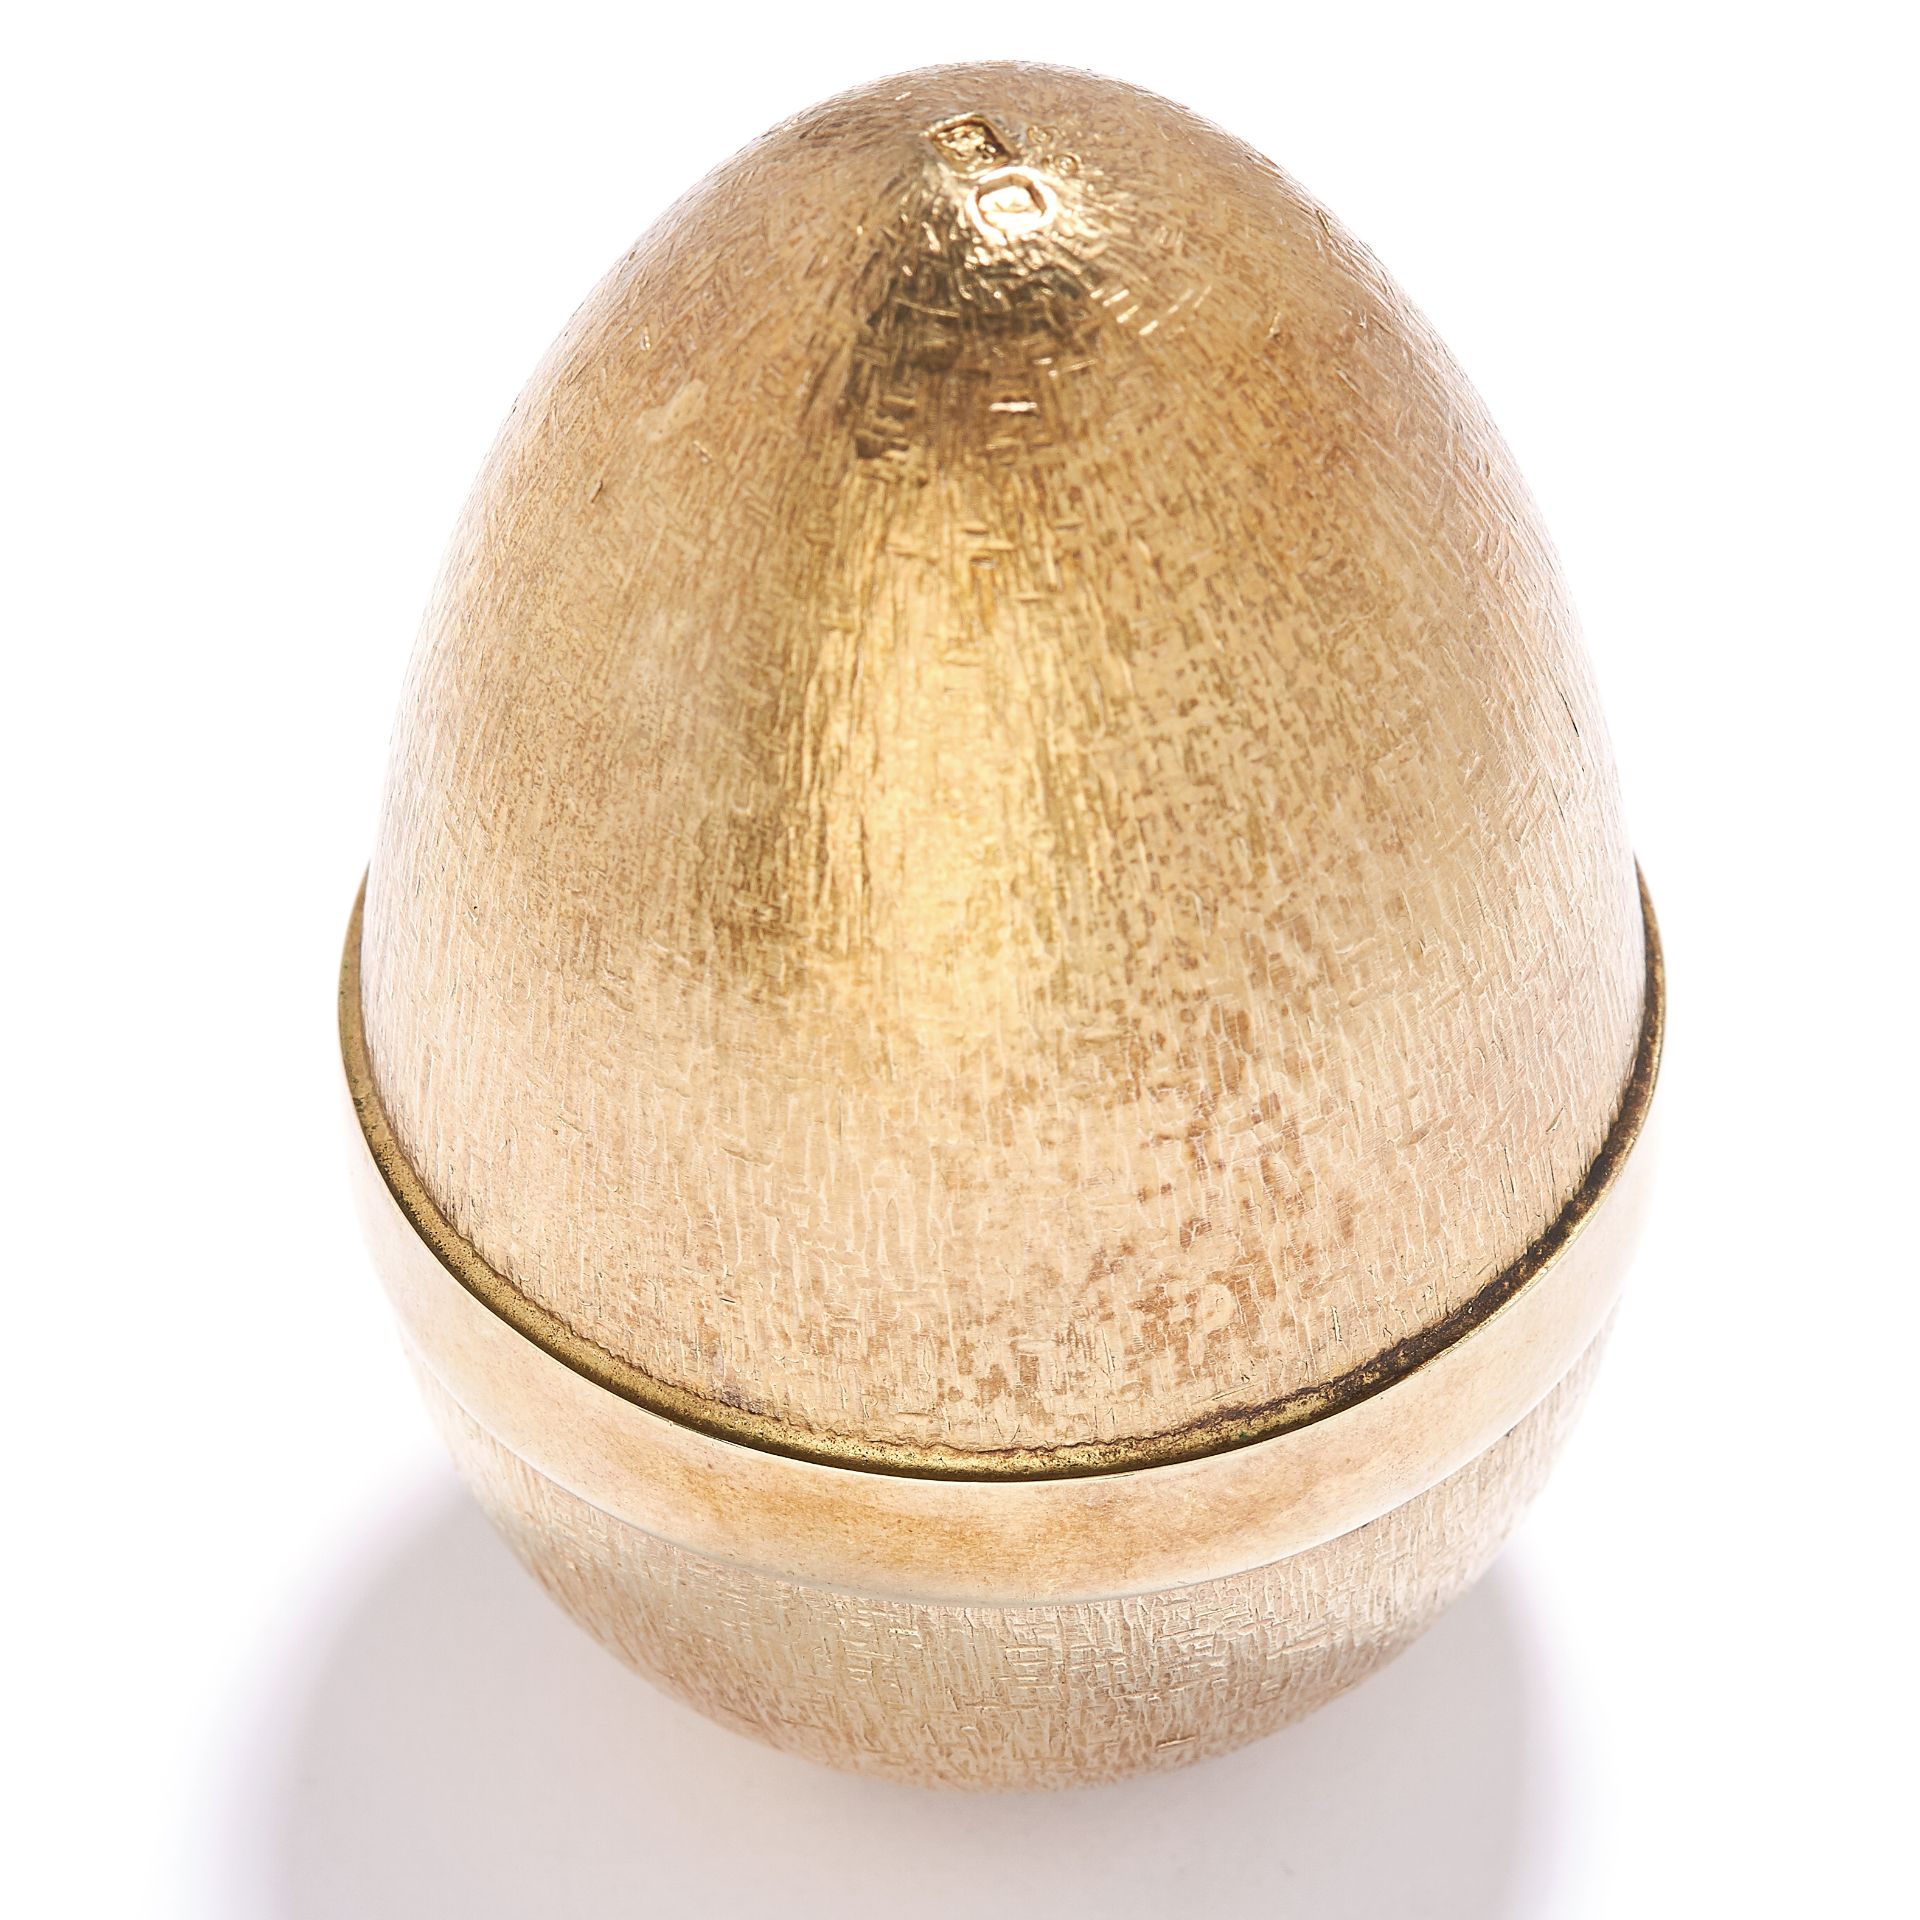 NOVELTY SURPRISE EASTER EGG, STUART DEVLIN, 1983 in silver gilt, the shell opens to reveal a chicken